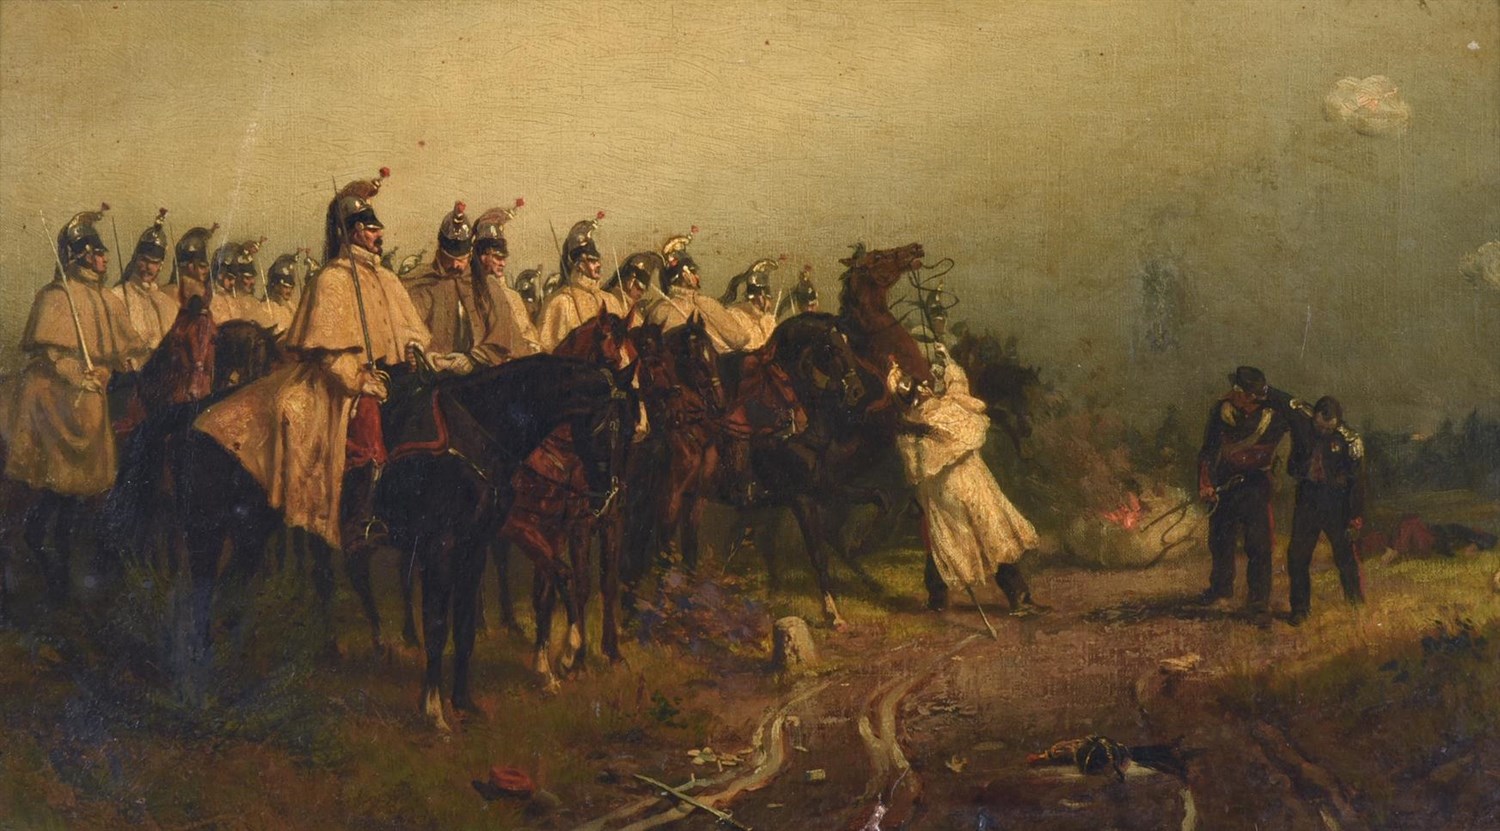 Lot 60 - Ernest Crofts RA (1847-1911)  Soldiers on horseback with the walking wounded nearby  Signed, oil on